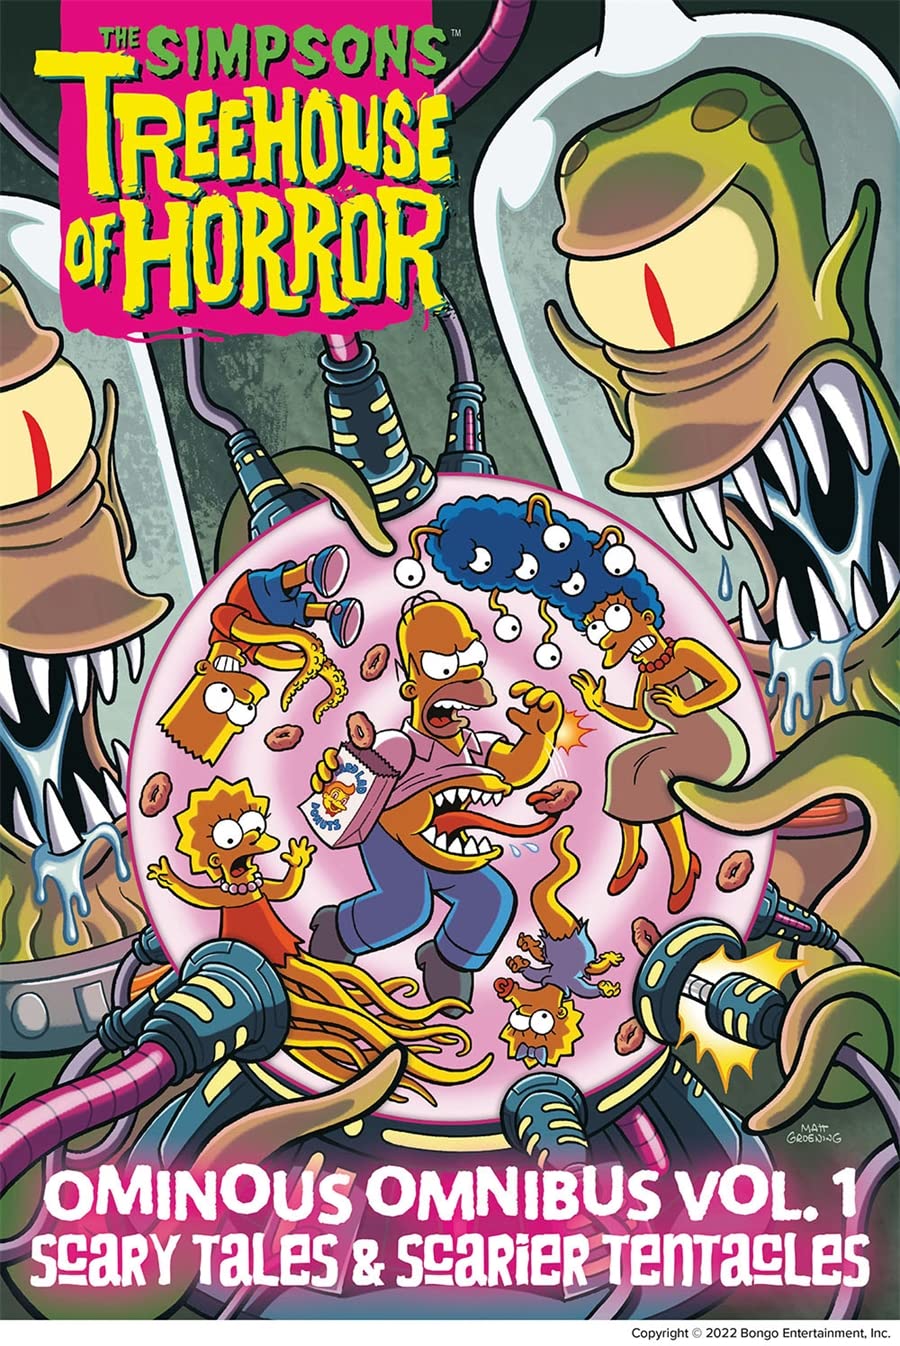 Simpsons Treehouse of Horror book cover